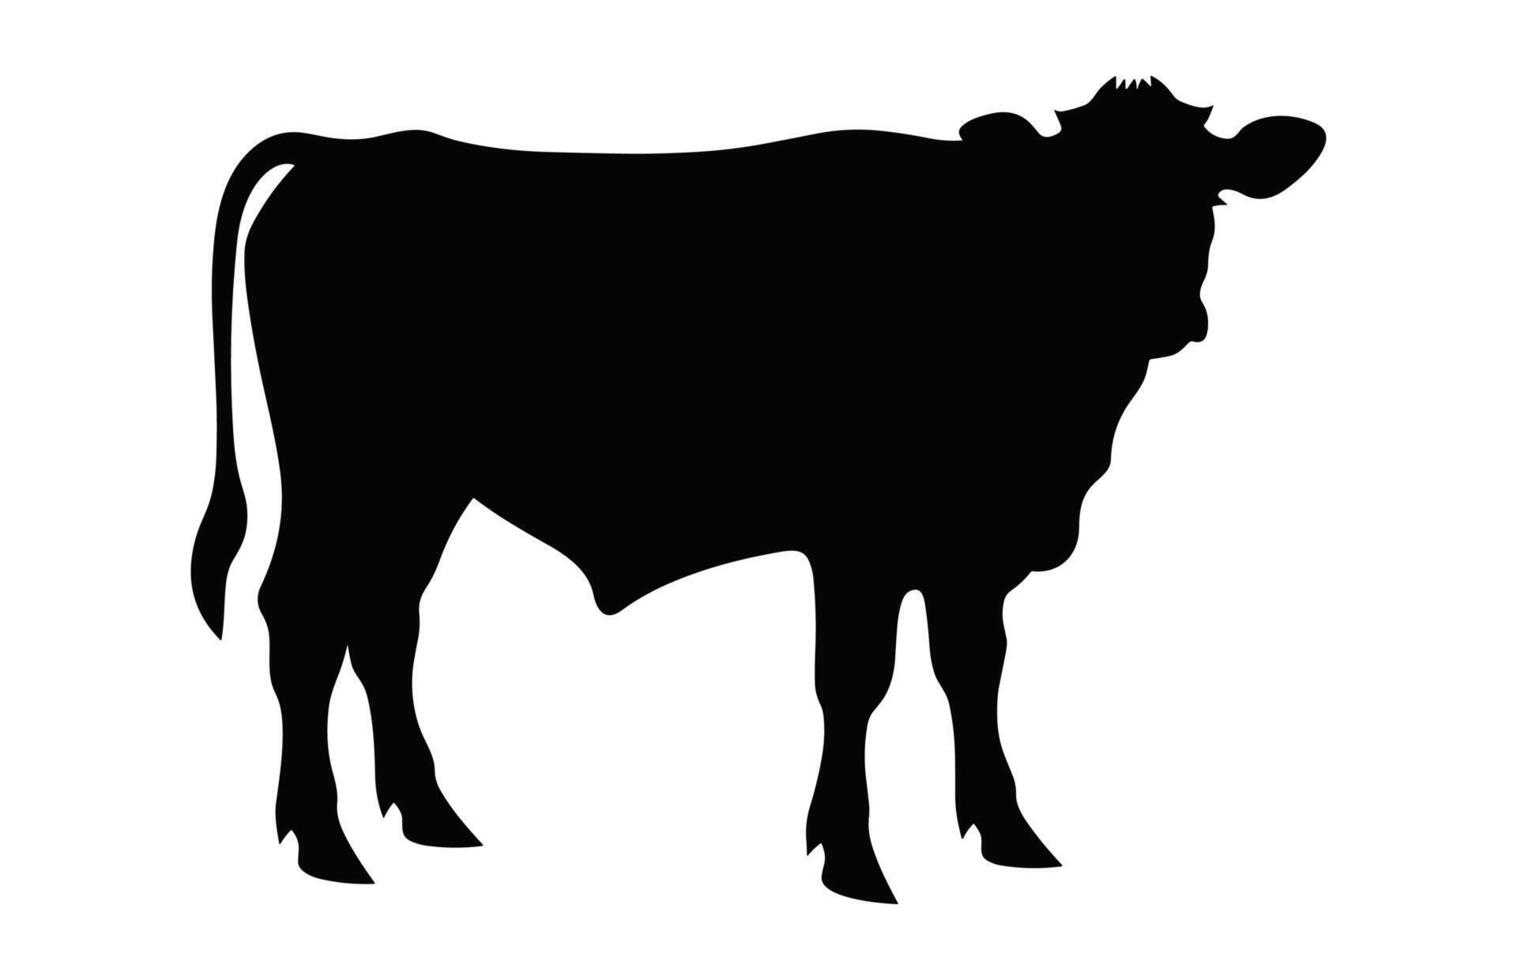 Hereford Cattle Cow Silhouette isolated on a white background vector